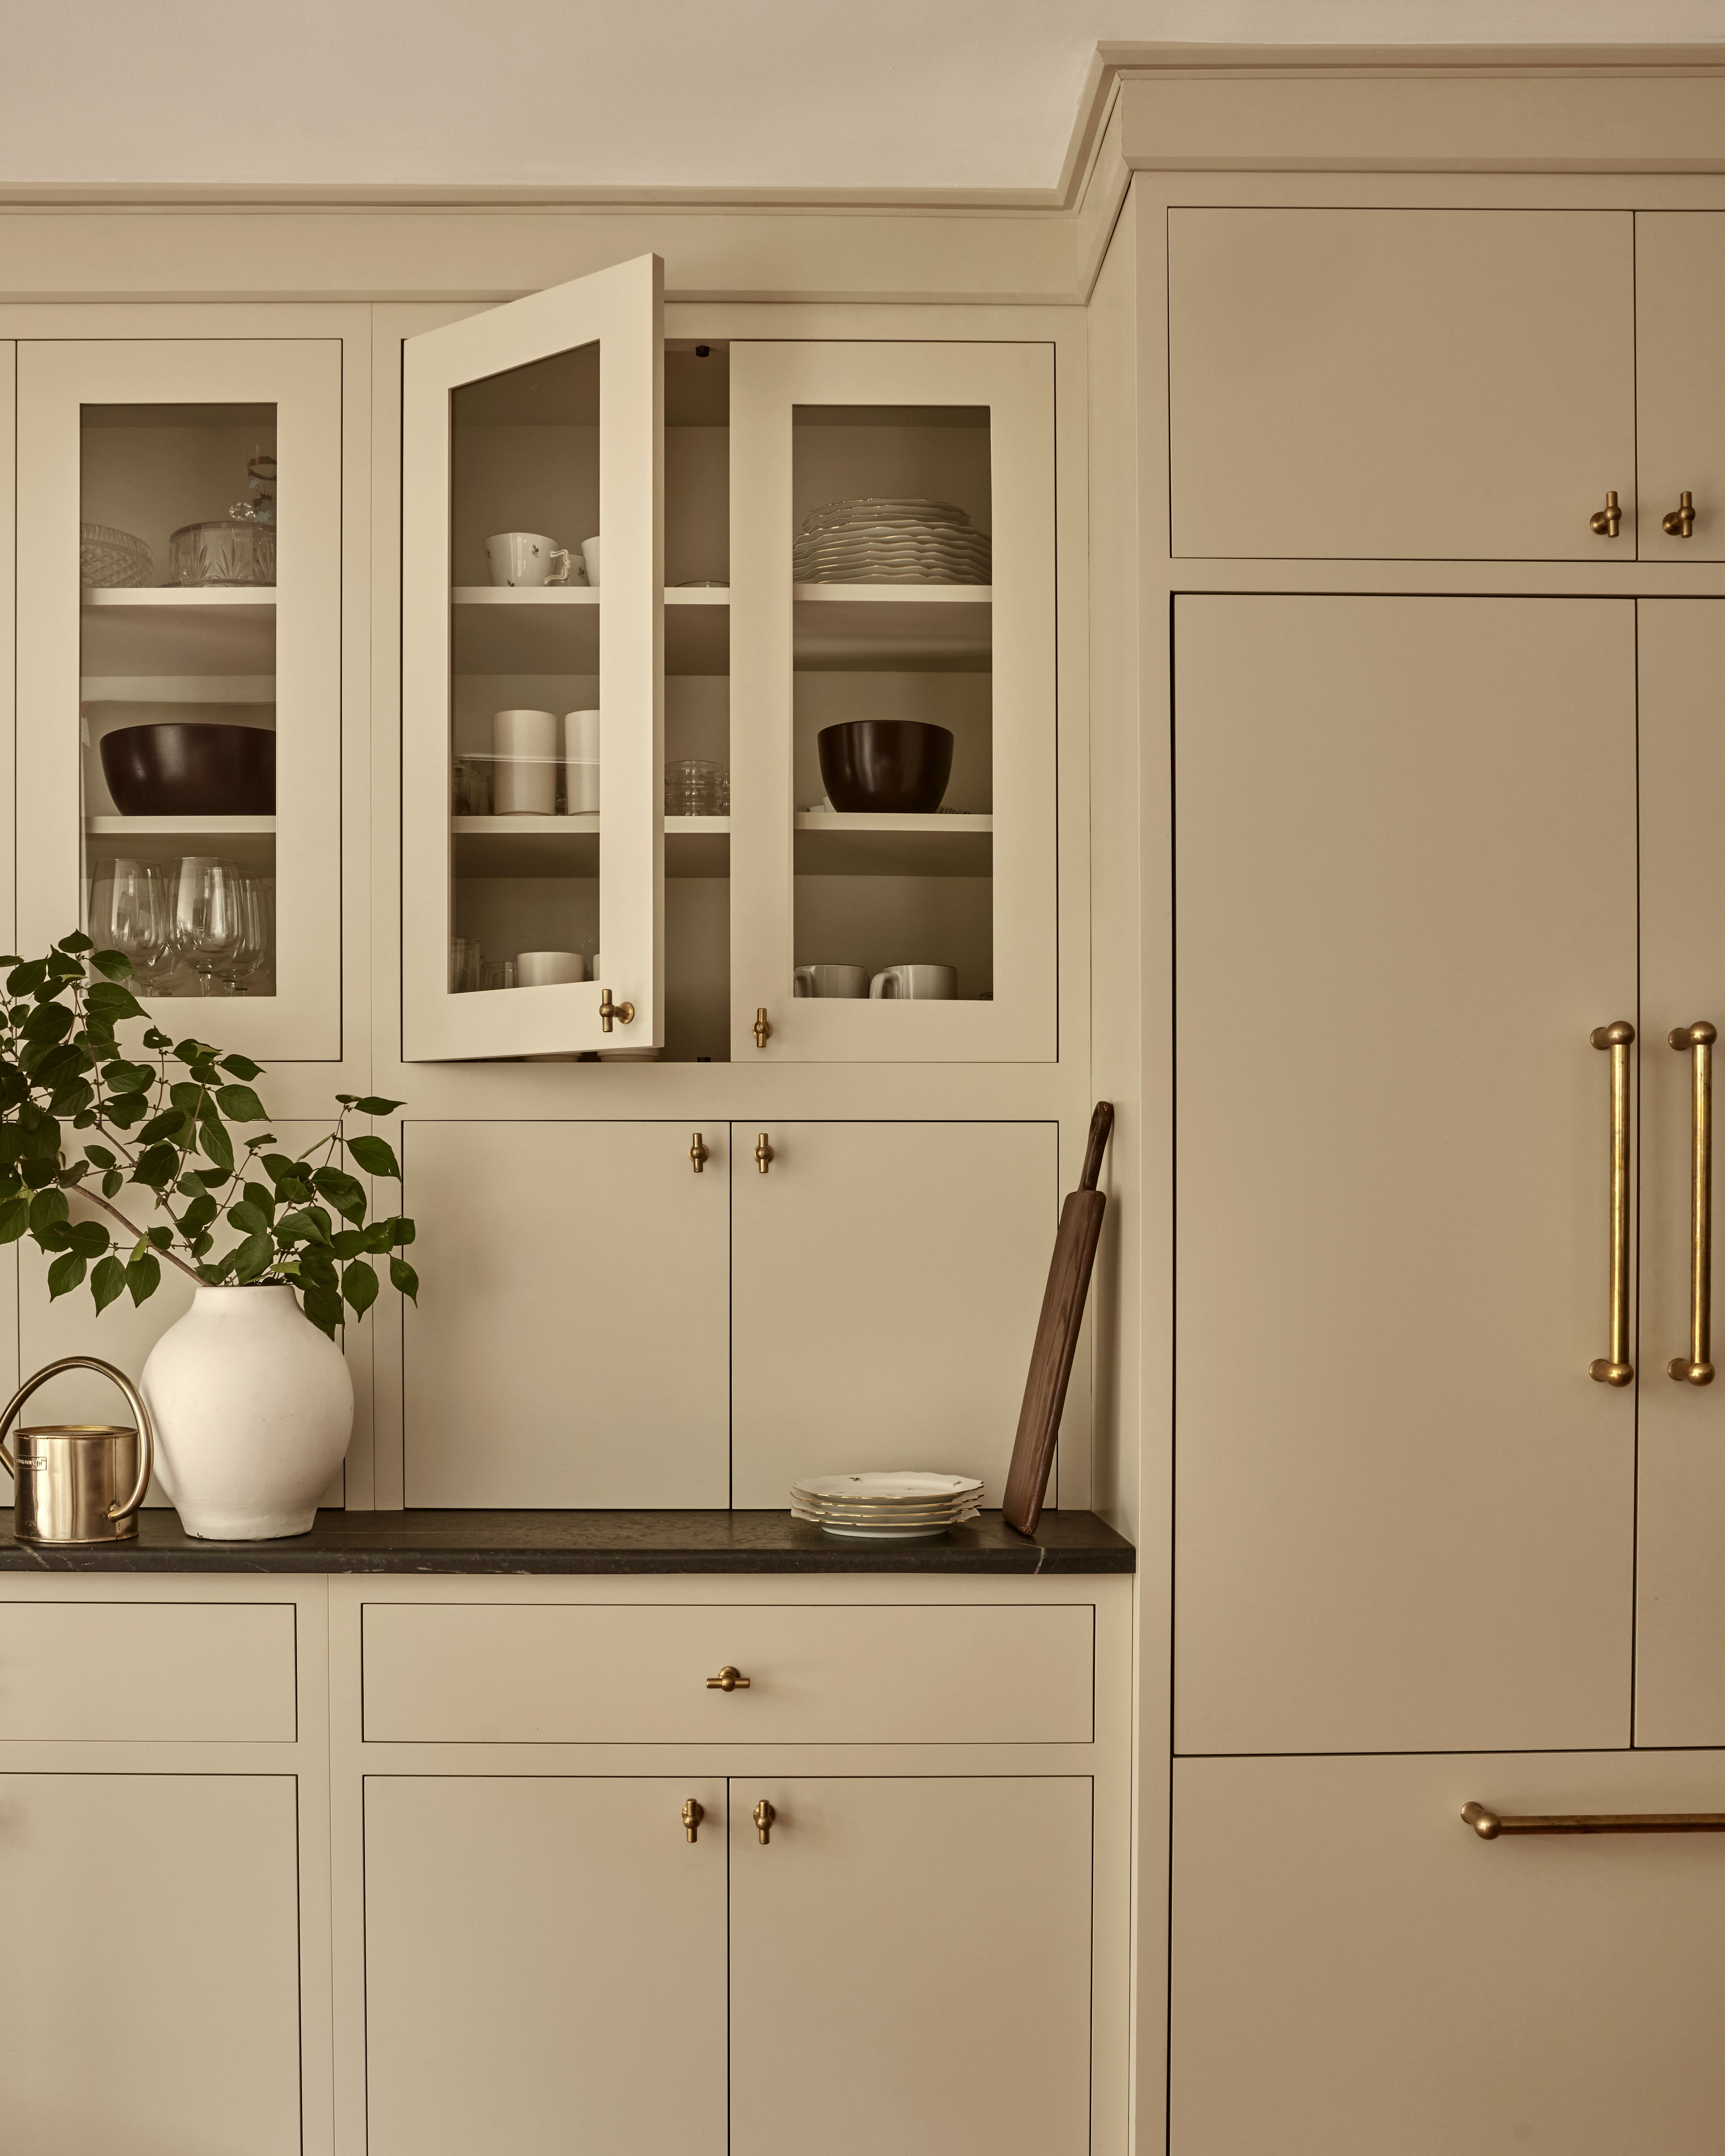 A kitchen with beige cabinets and unlacquered knobs